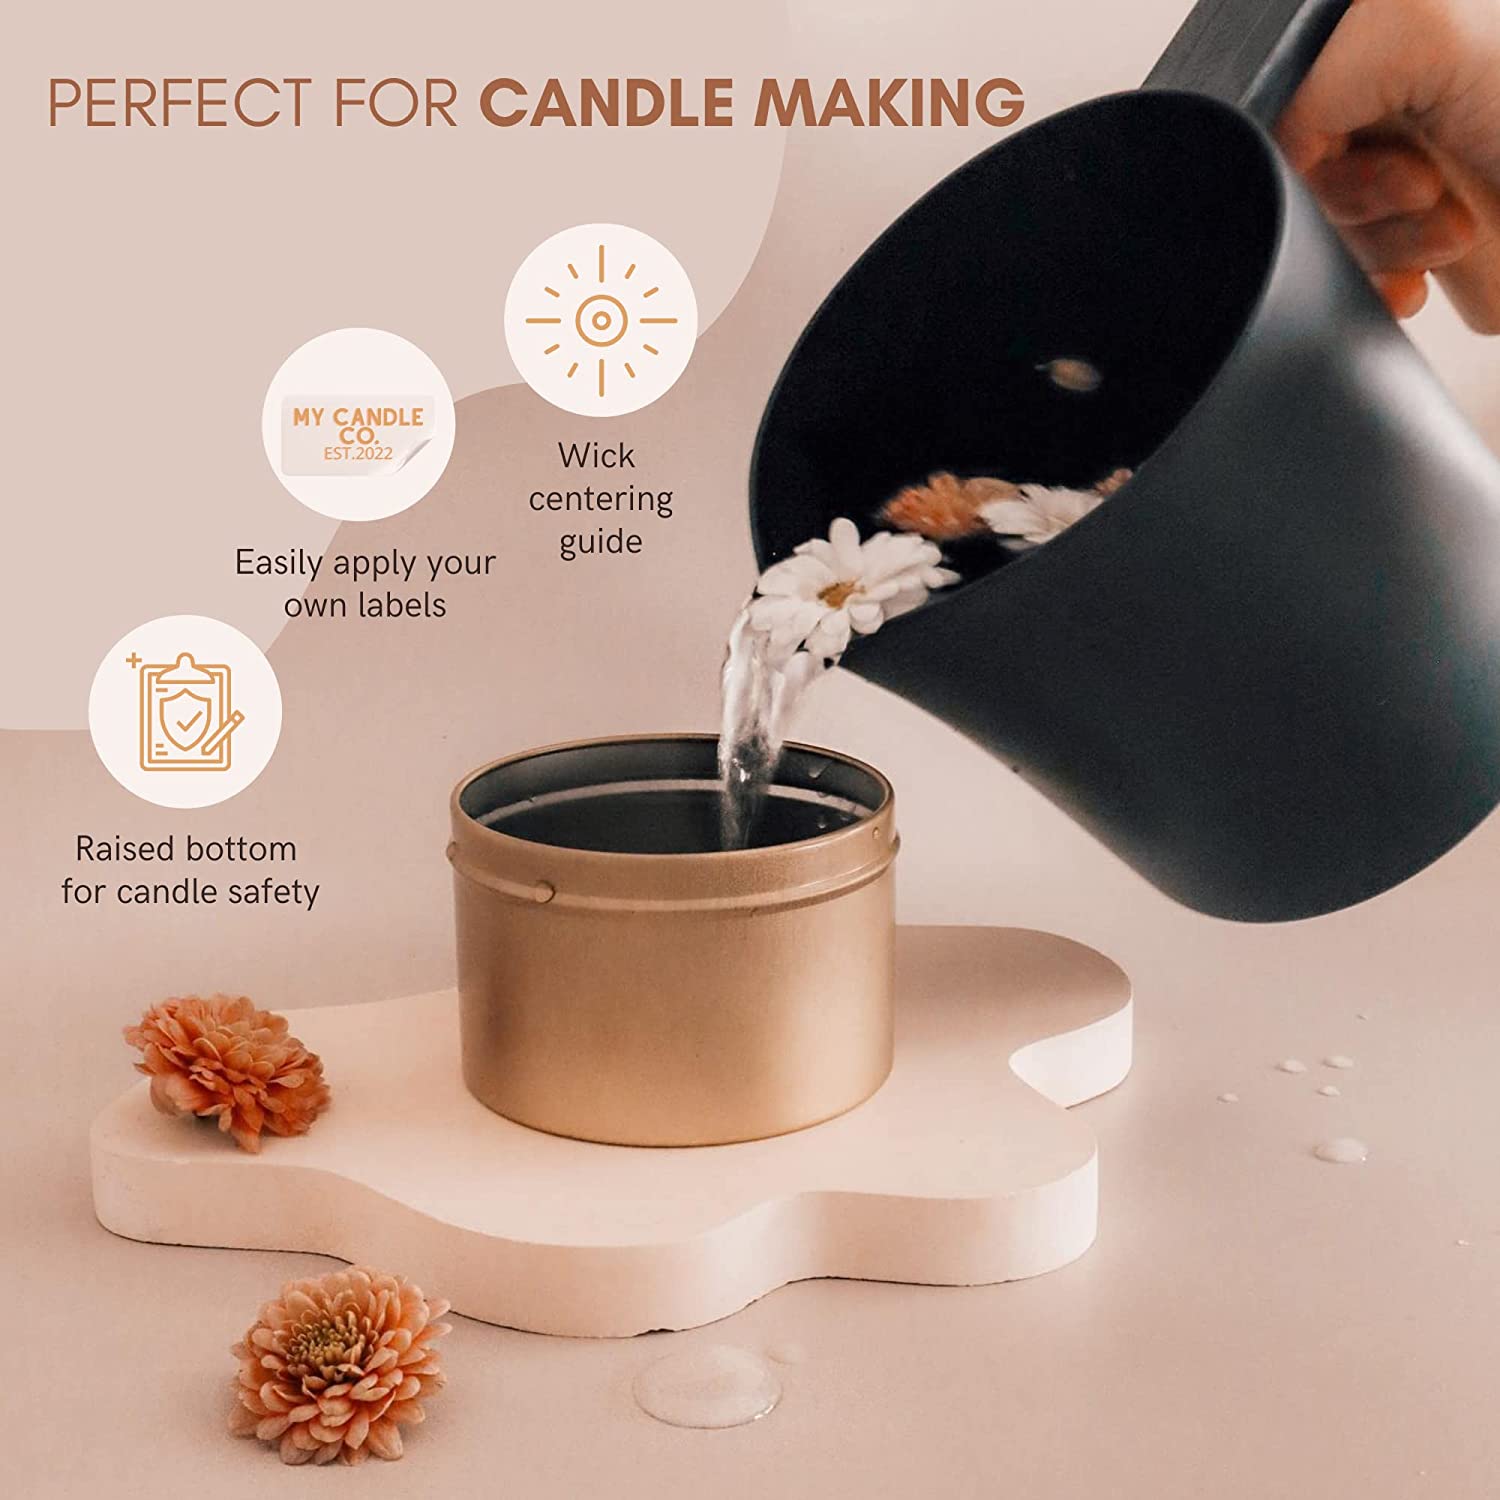 Virtual Candle making class with Kit - Crystal intention Candle making